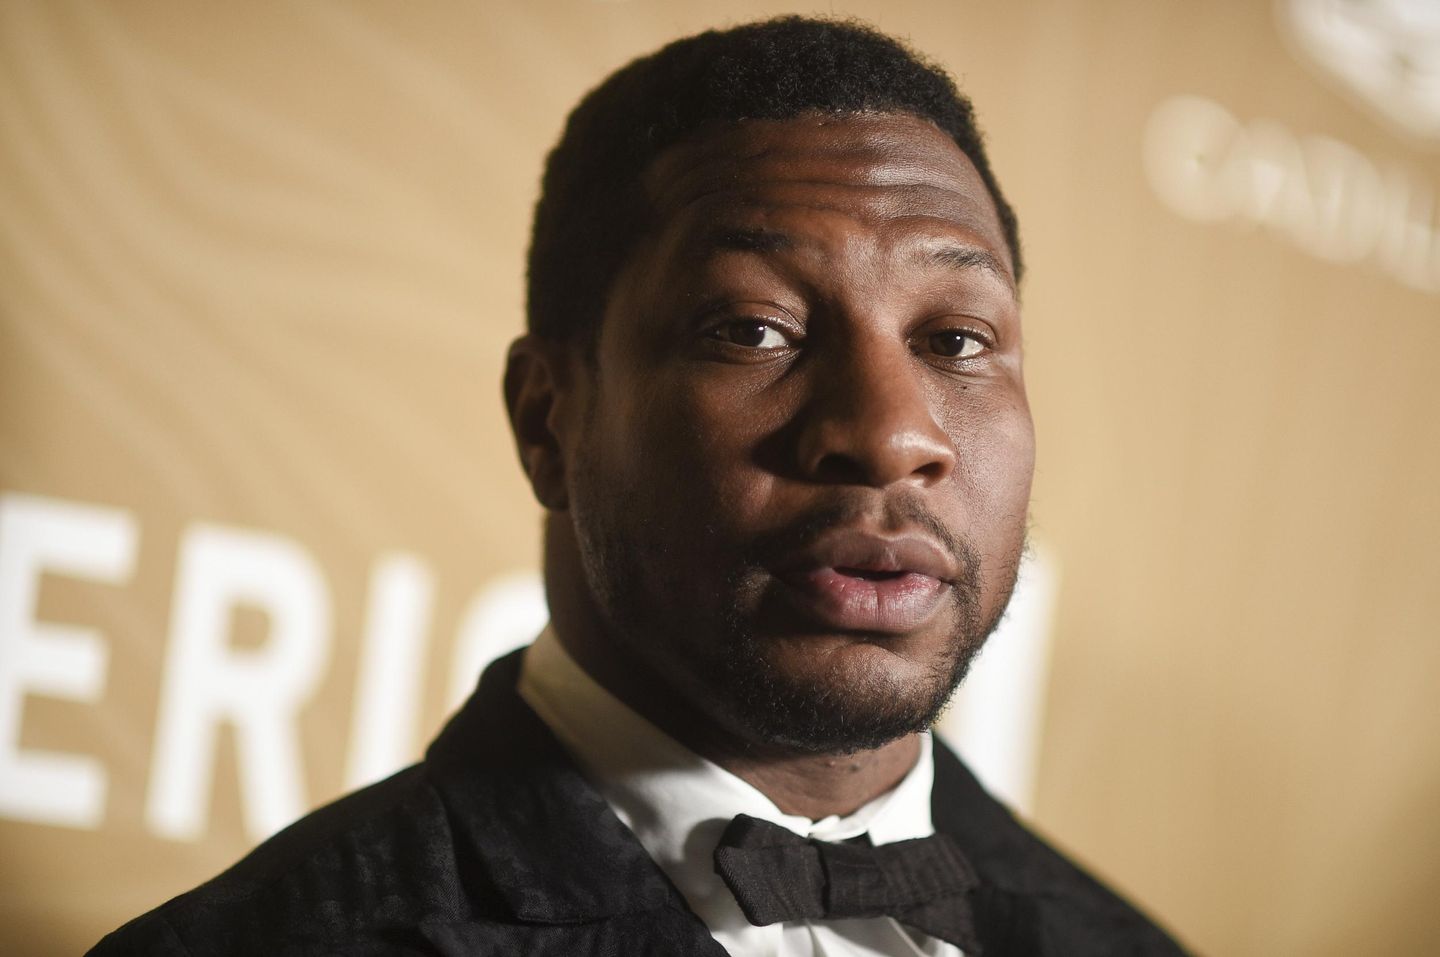 ‘Creed III’ actor Jonathan Majors arrested in New York following domestic dispute